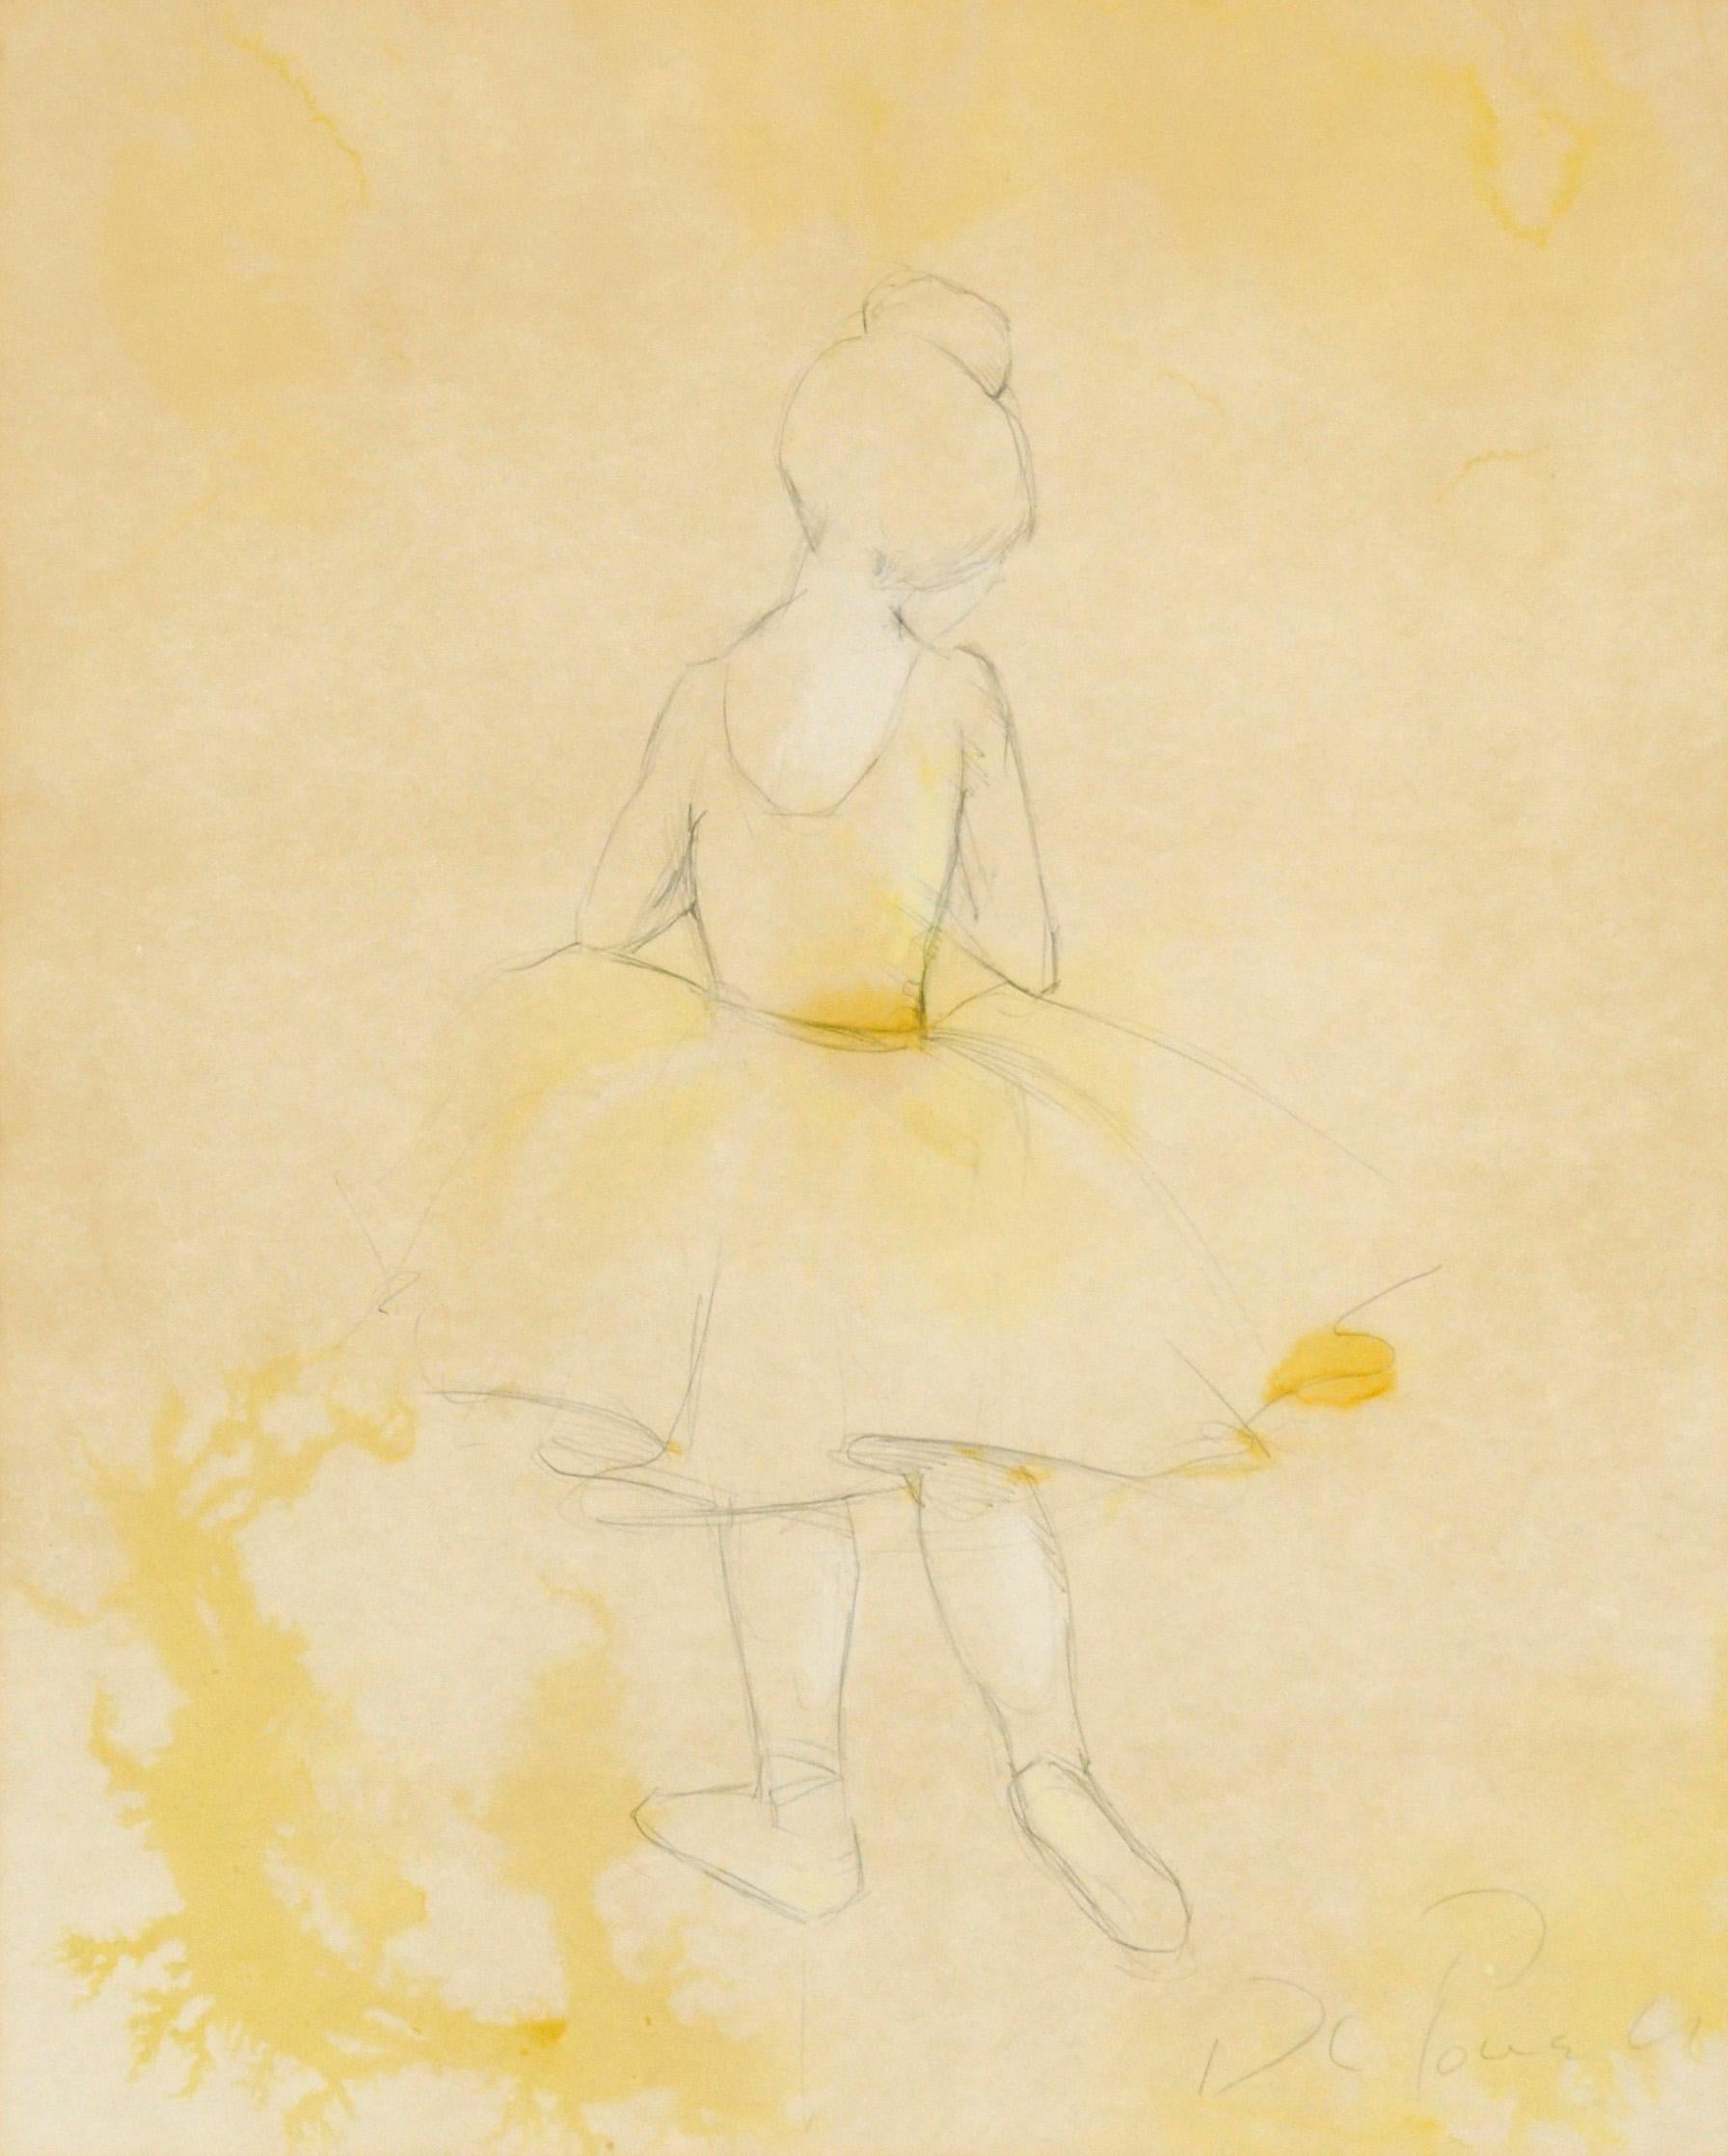 The Little Ballerina - Figurative Drawing in Pencil on Paper - Art by Unknown